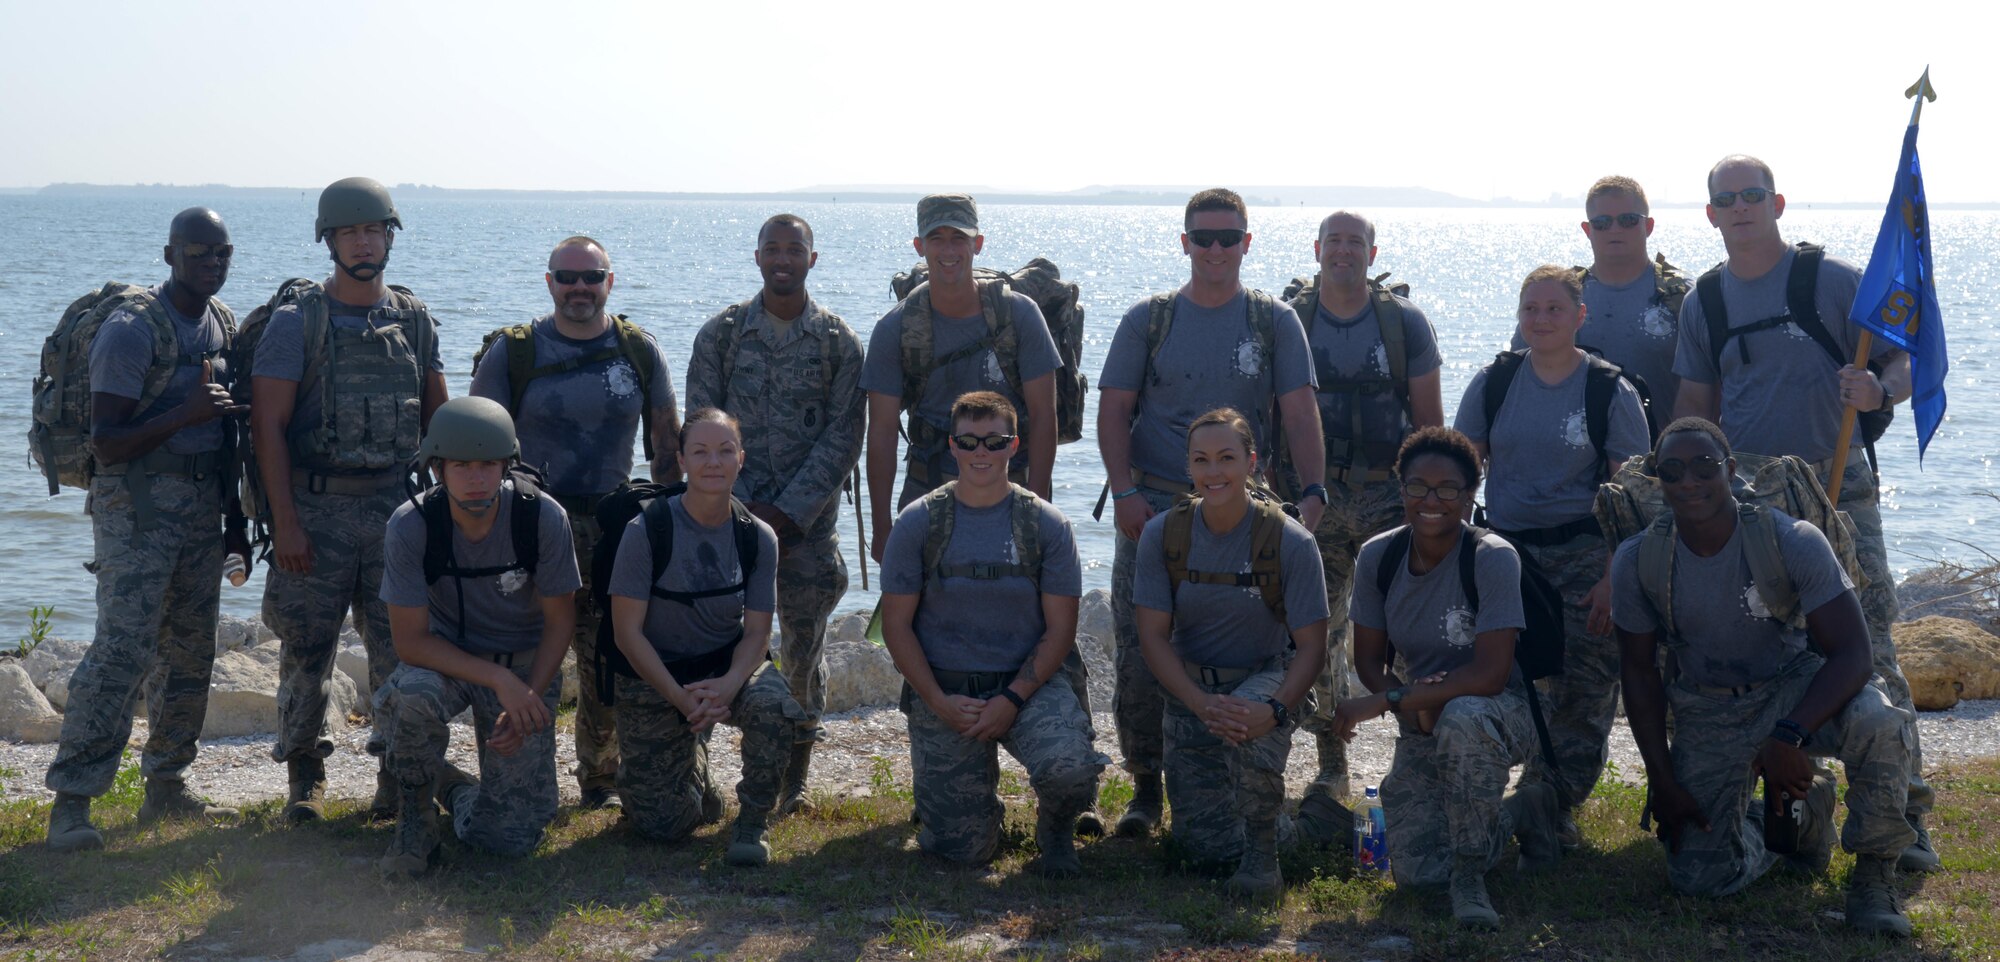 Airmen from the 6th Security Forces Squadron (SFS) pause for a photo at MacDill Air Force Base, Fla., May 15, 2017. The 6th SFS held an opening ceremony and completed a 5K ruck march in honor of National Police Week, May 15-21, 2017. (U.S. Air Force photo by Senior Airman Tori Long)